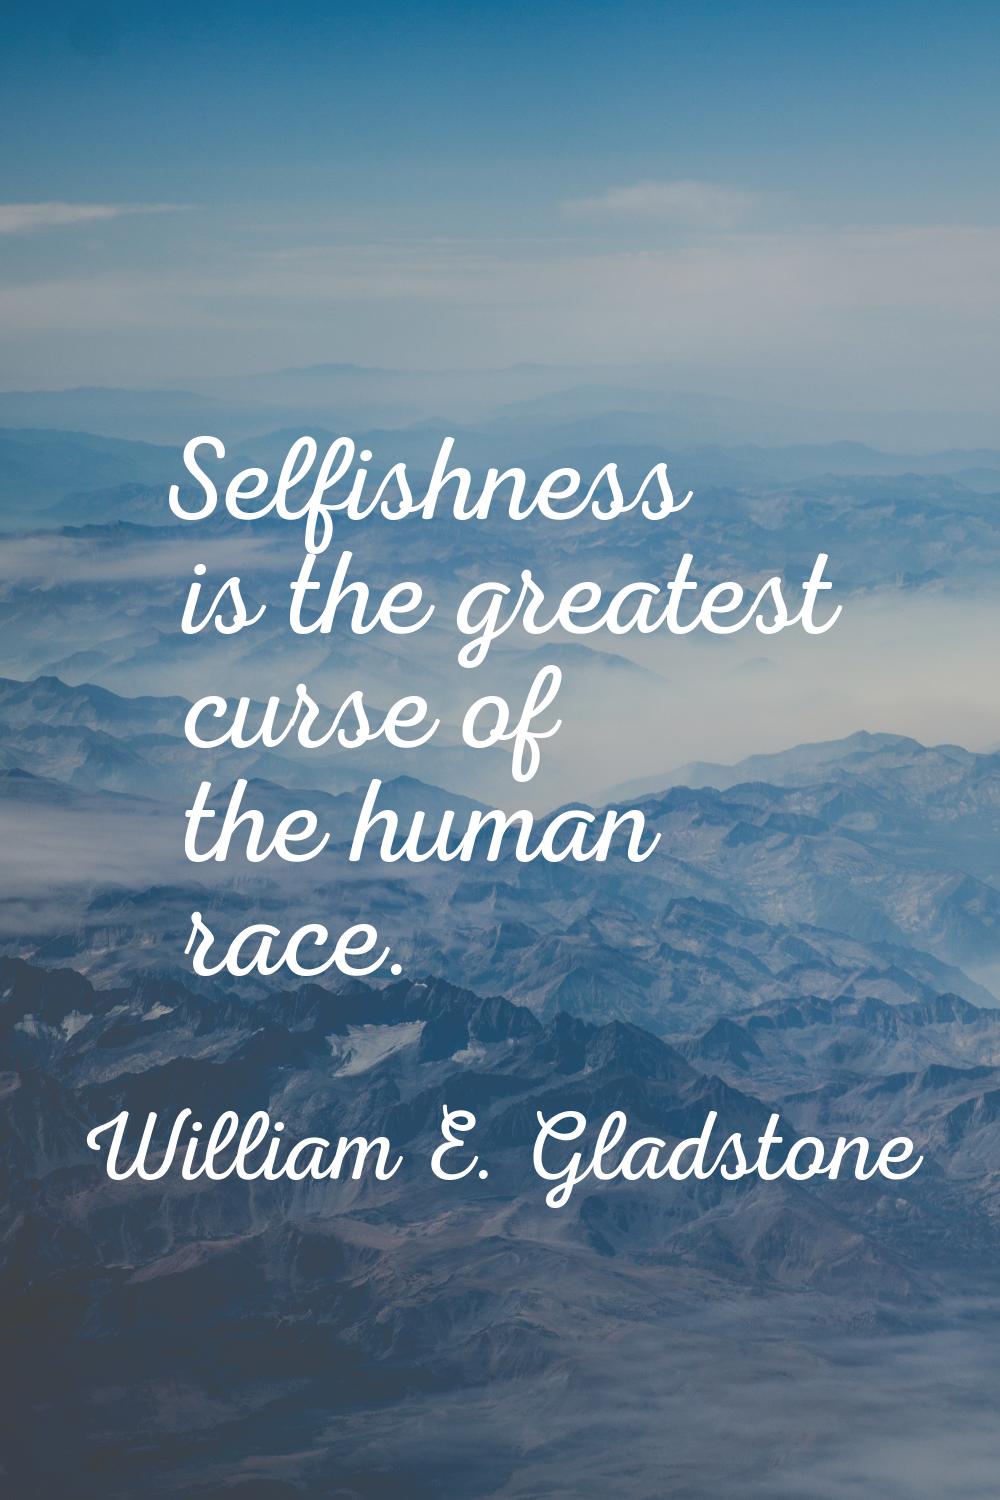 Selfishness is the greatest curse of the human race.